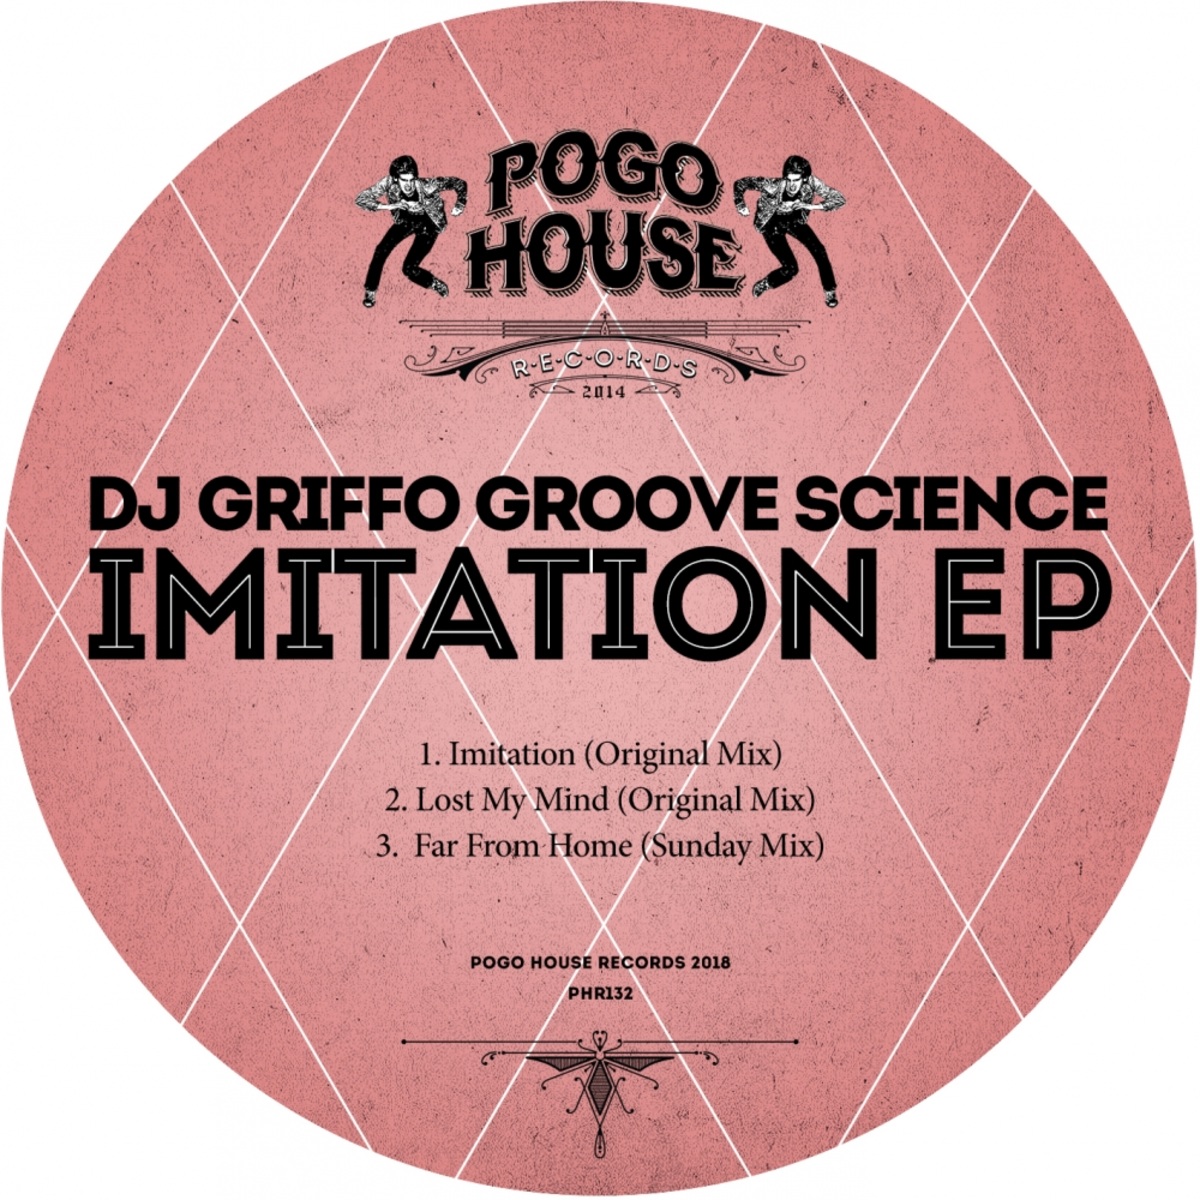 Dj Griffo Groove Science - Imitation EP / Pogo House Records